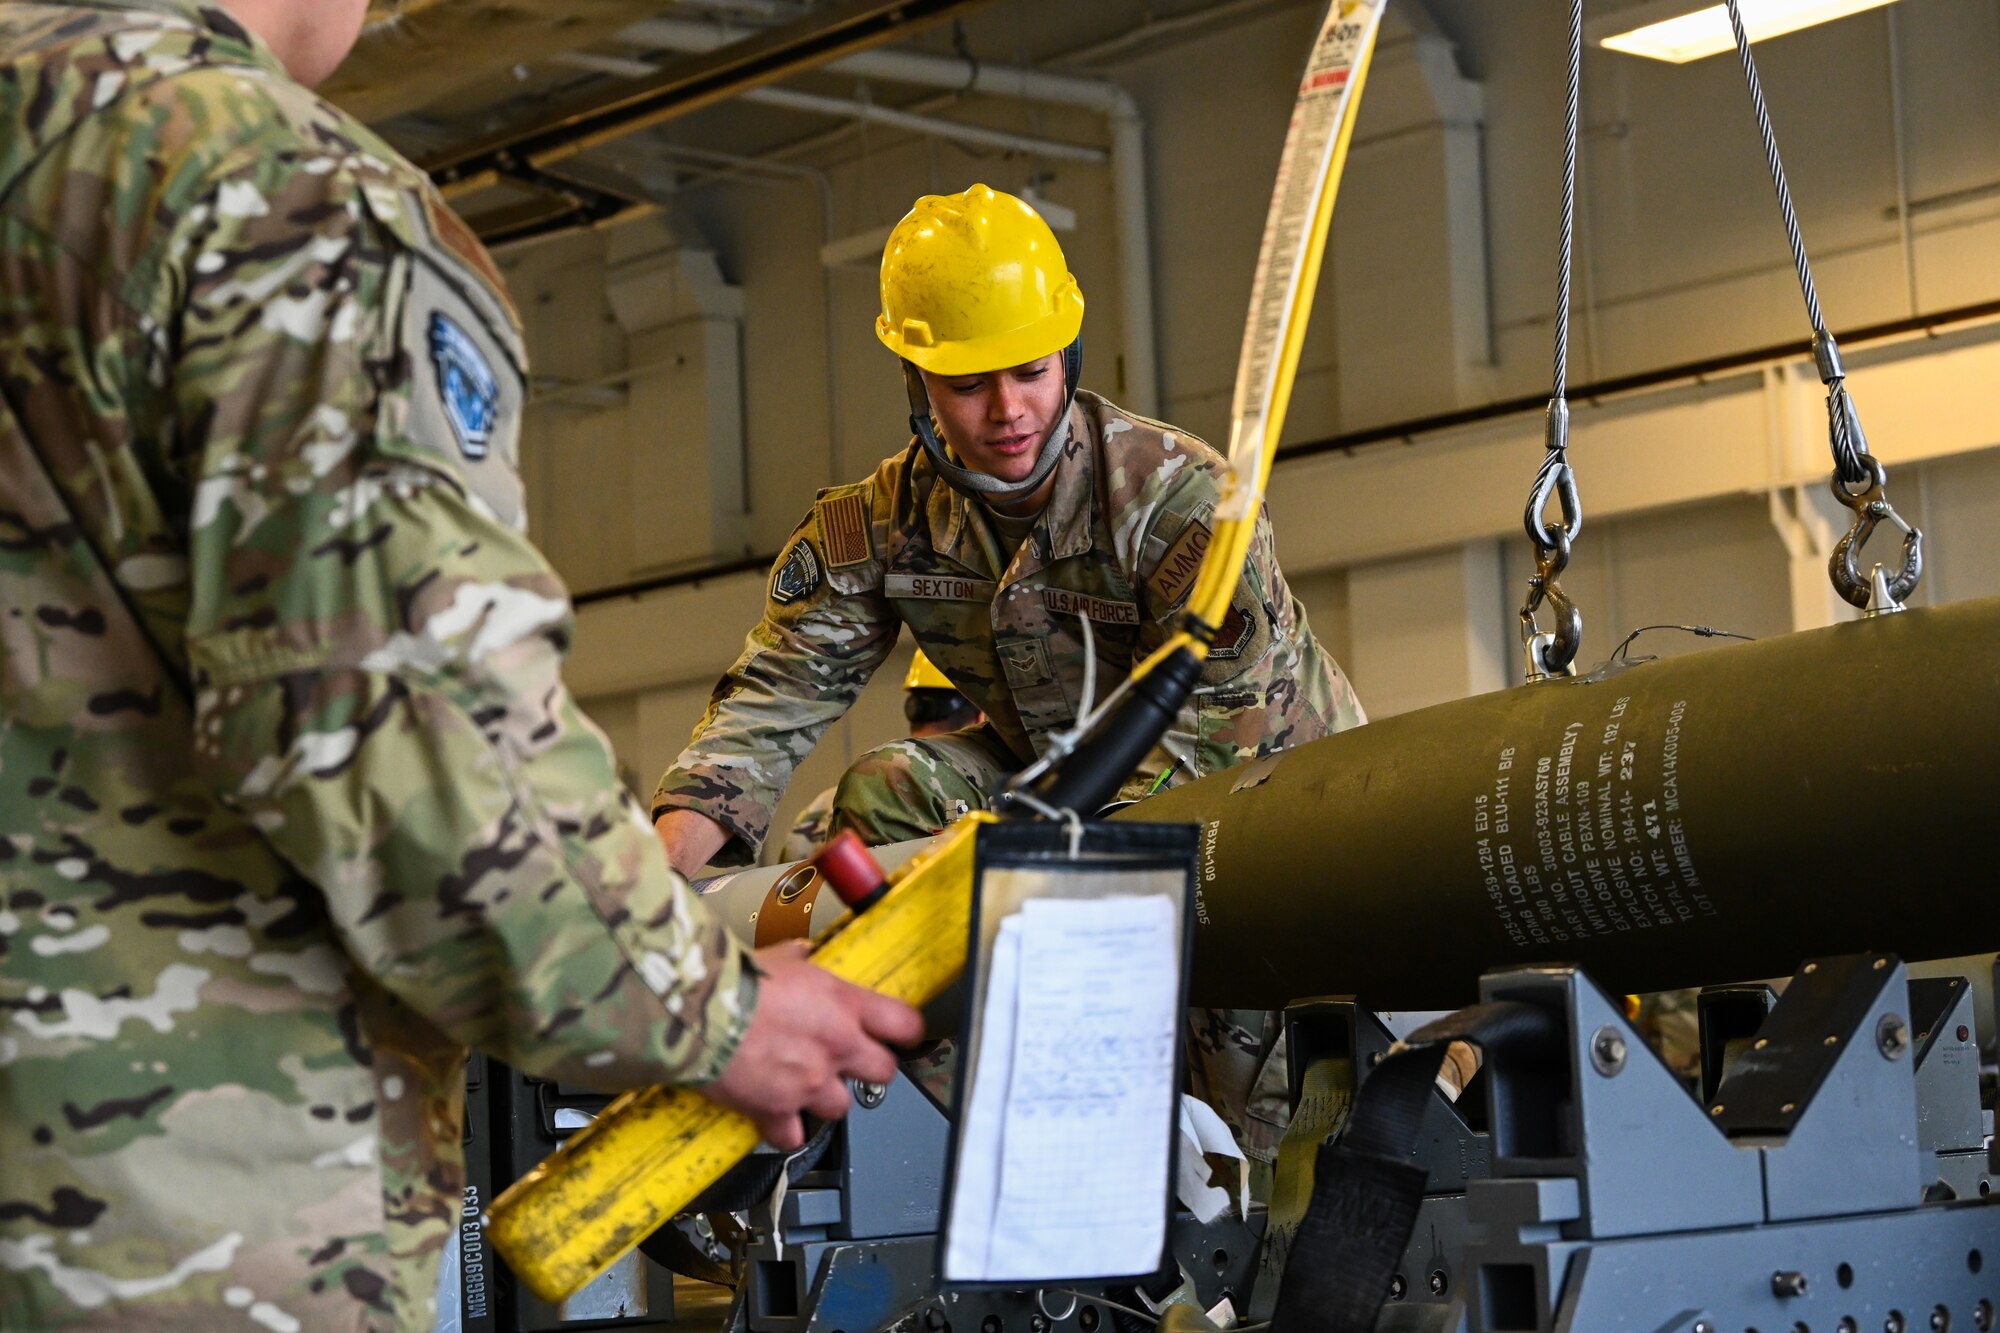 Airman 1st Class Trevor Sexton, 5th Munitions Squadron munitions line delivery crew chief, loads an Mk-82 ordnance during Operation Tundra Swan at Minot Air Force Base, North Dakota, Oct. 2, 2023. Operation Tundra Swan is a 5th MUNS exercise that implements the Agile Combat Employment concept and focuses on training efforts in scenarios where Airmen might not have everything they expect to produce ordnance from a decentralized location. (U.S. Air Force photo by Airman 1st Class Alyssa Bankston)